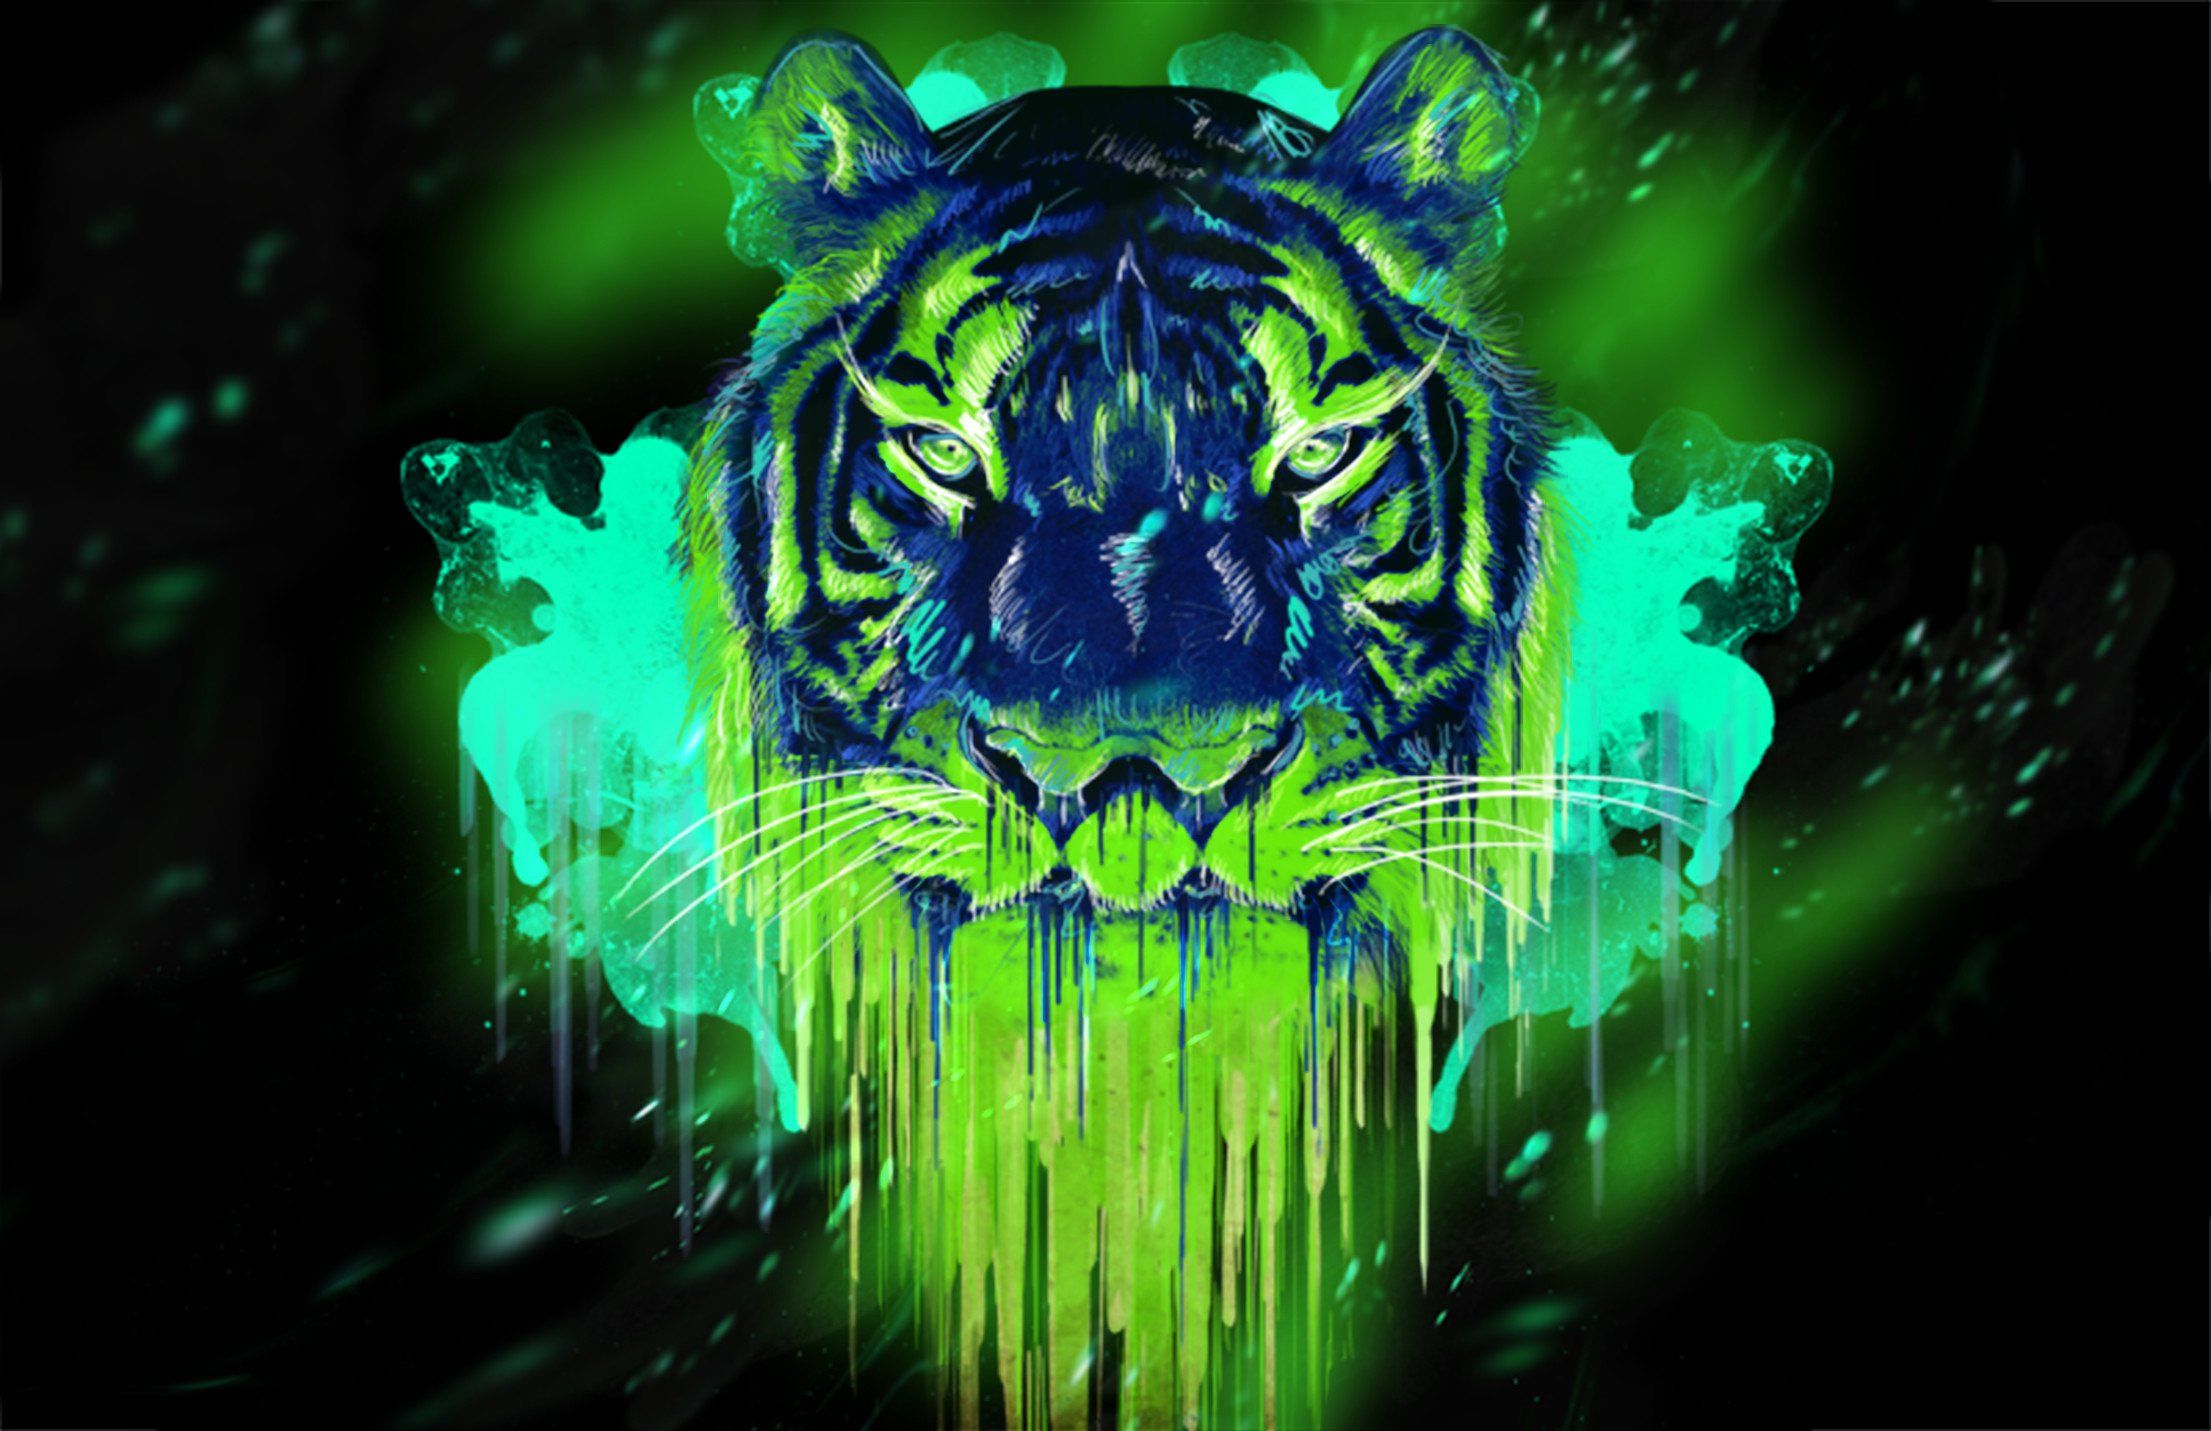 Cool Tiger Backgrounds